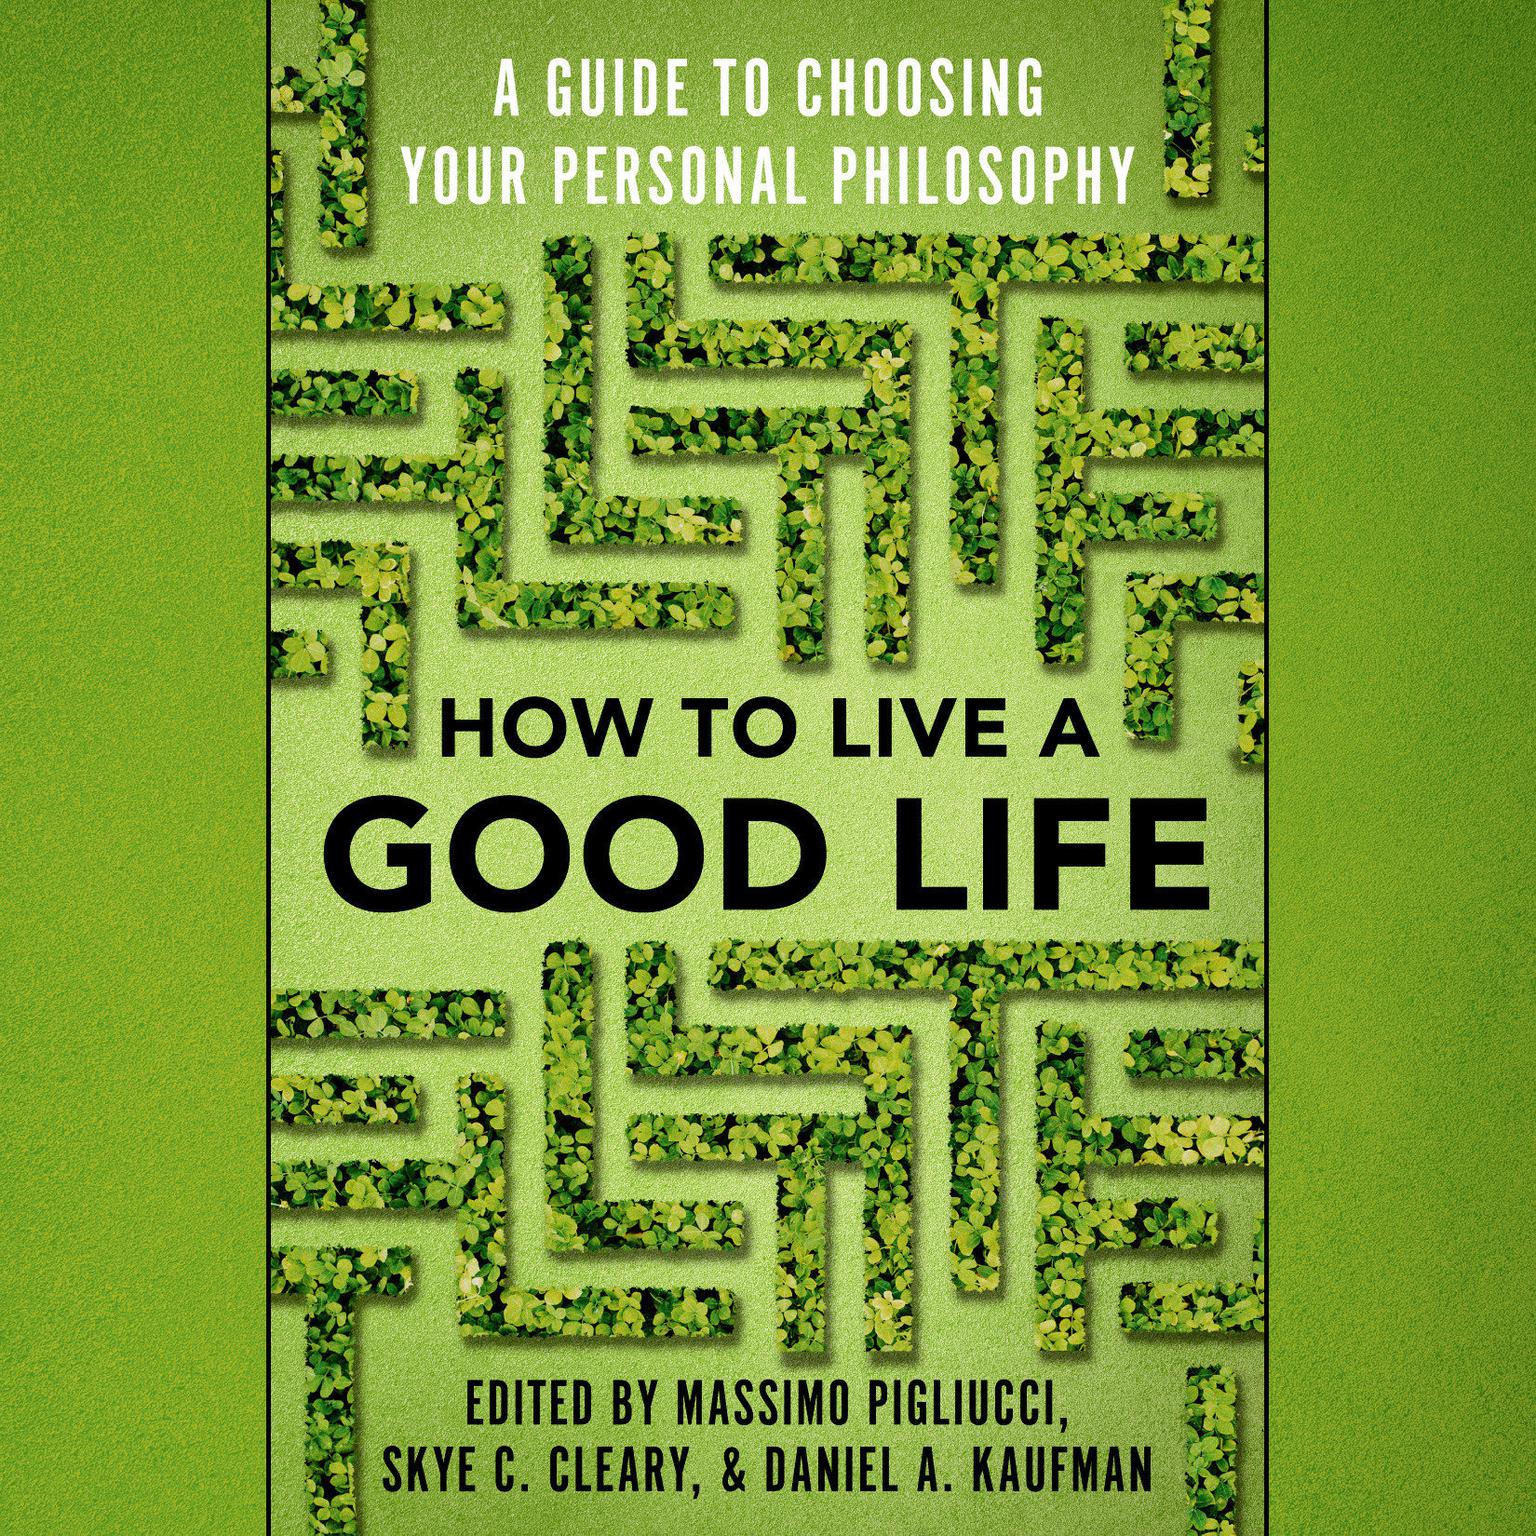 How to Live a Good Life: A Guide to Choosing Your Personal Philosophy Audiobook, by Massimo Pigliucci